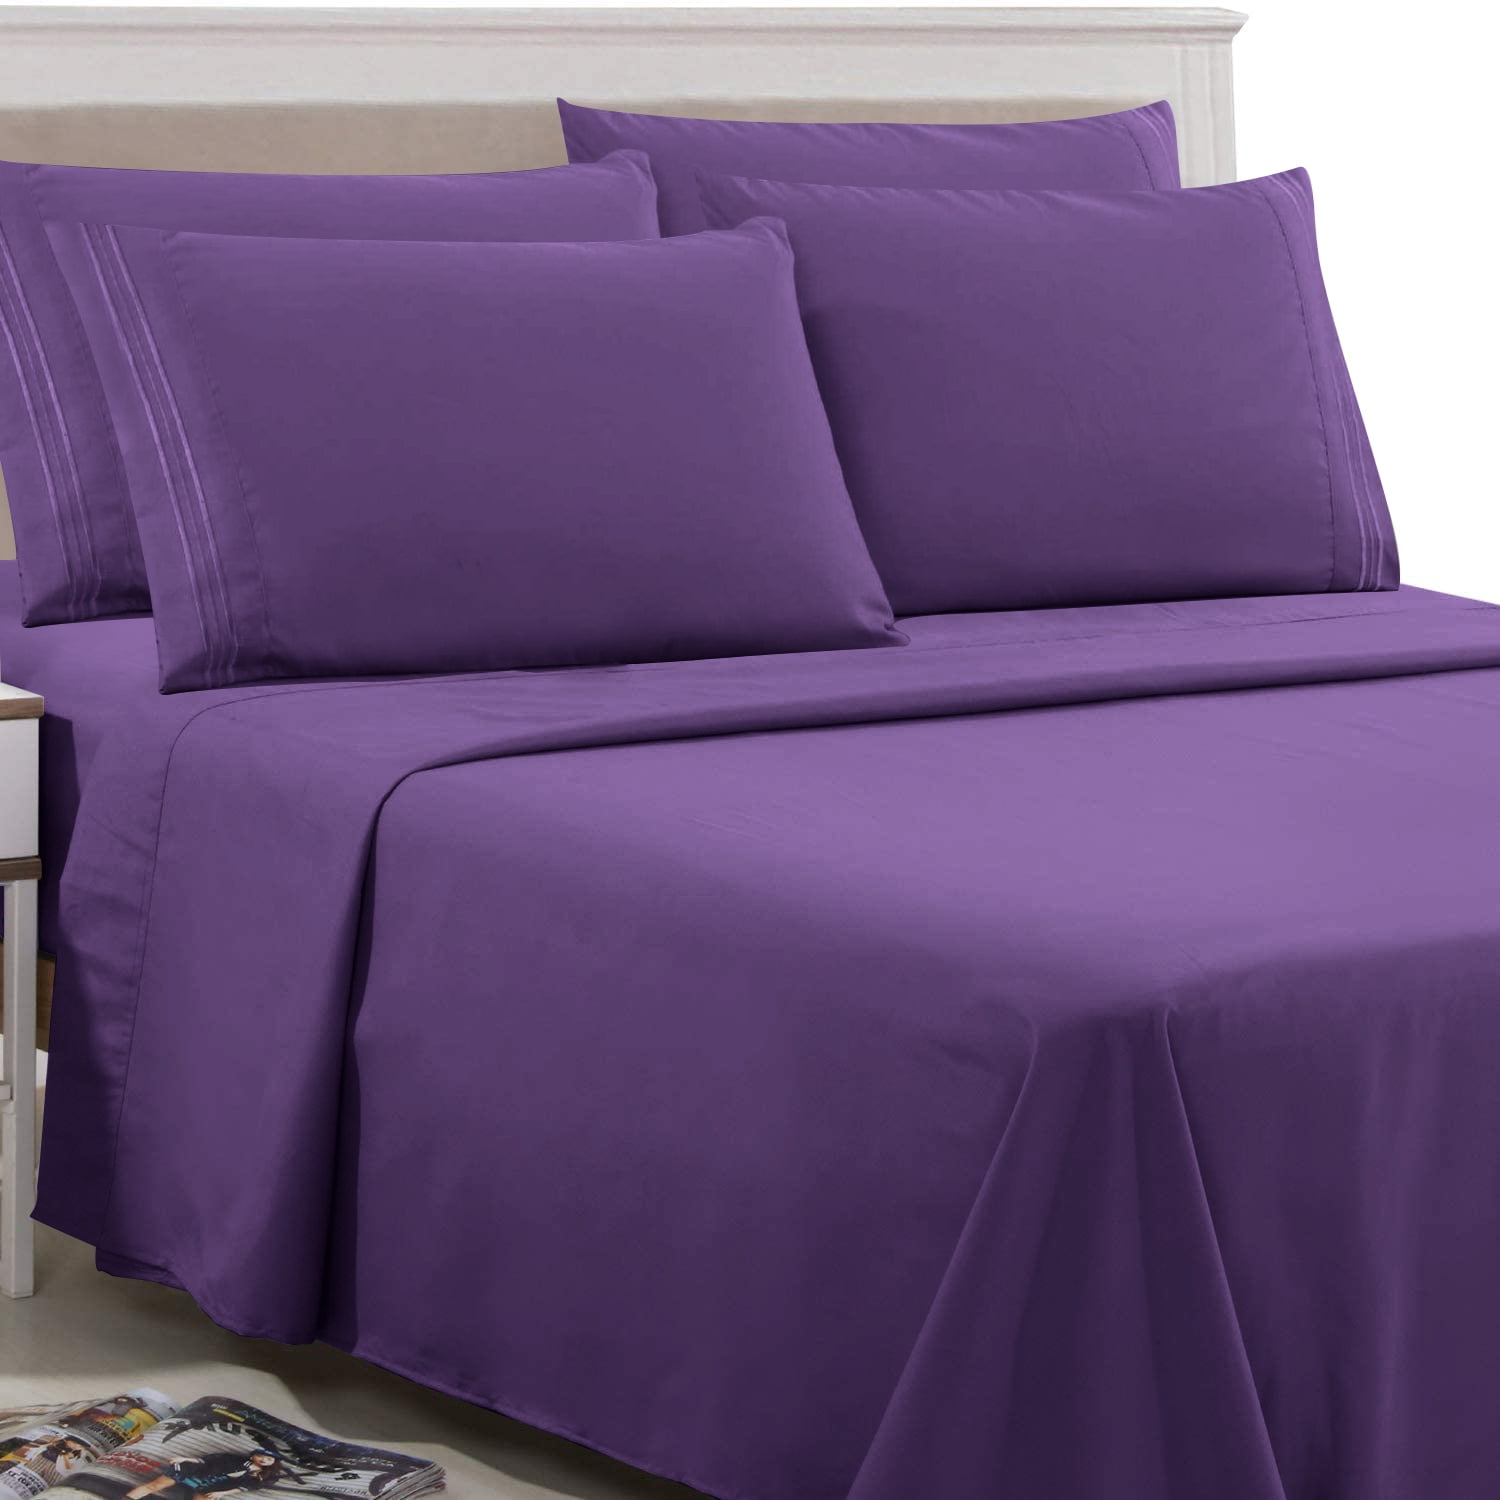 Details about   Fitted Sheet+2 Pillow Case Deep Pocket Organic Cotton Solid Colors Queen Size 